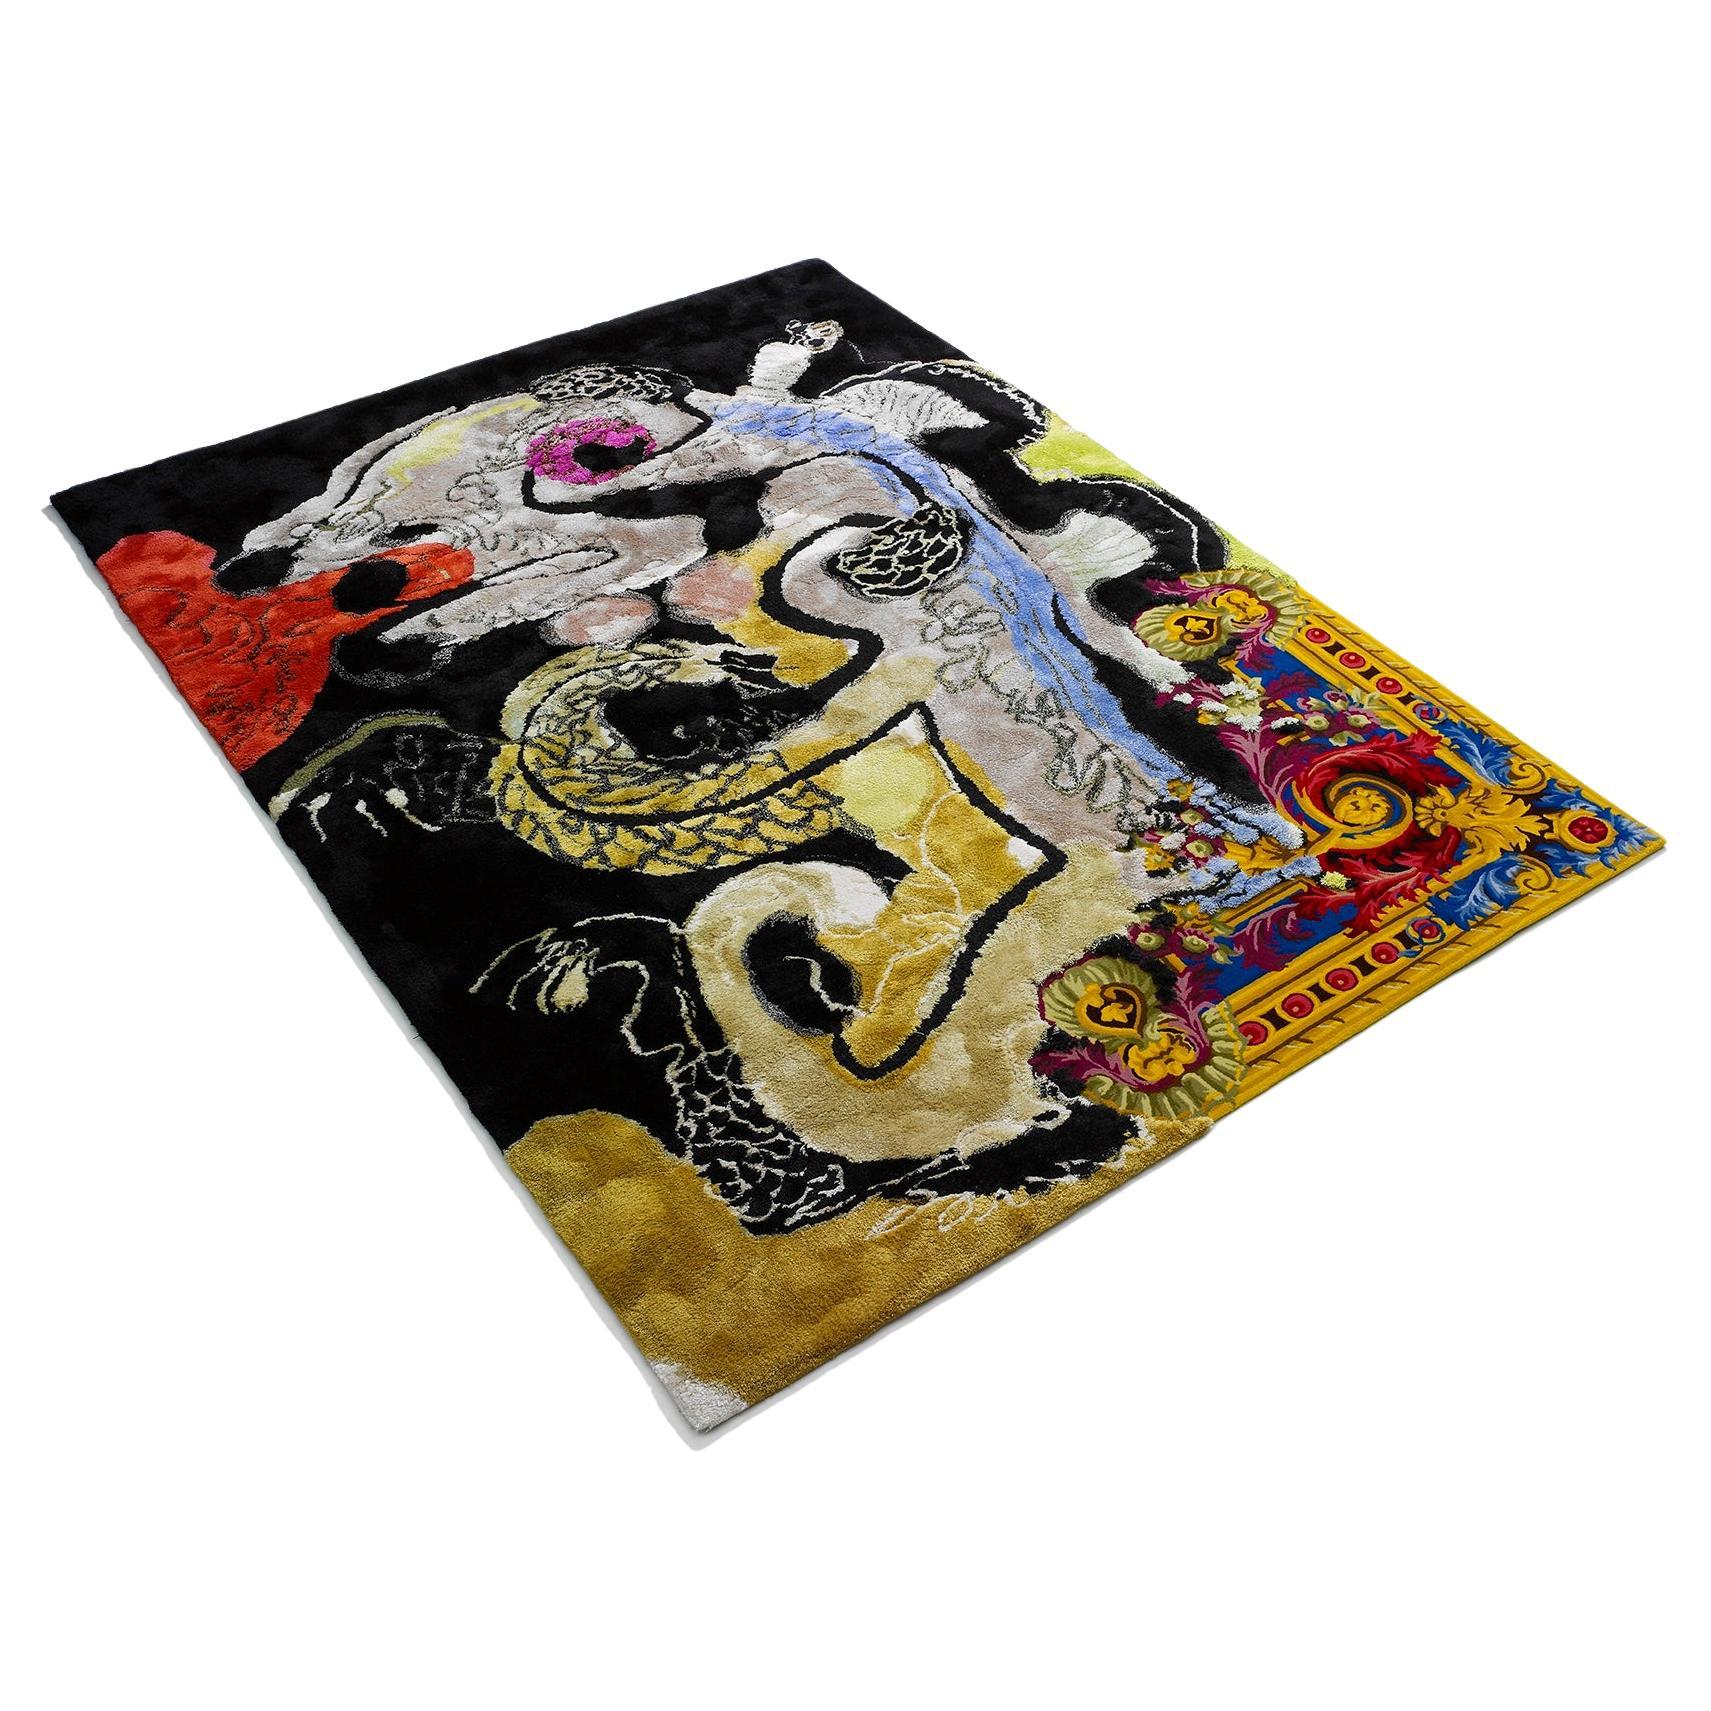 Christian Lacroix Carpet for ToolsGalerie #1/5, France, 2009, in stock  For Sale